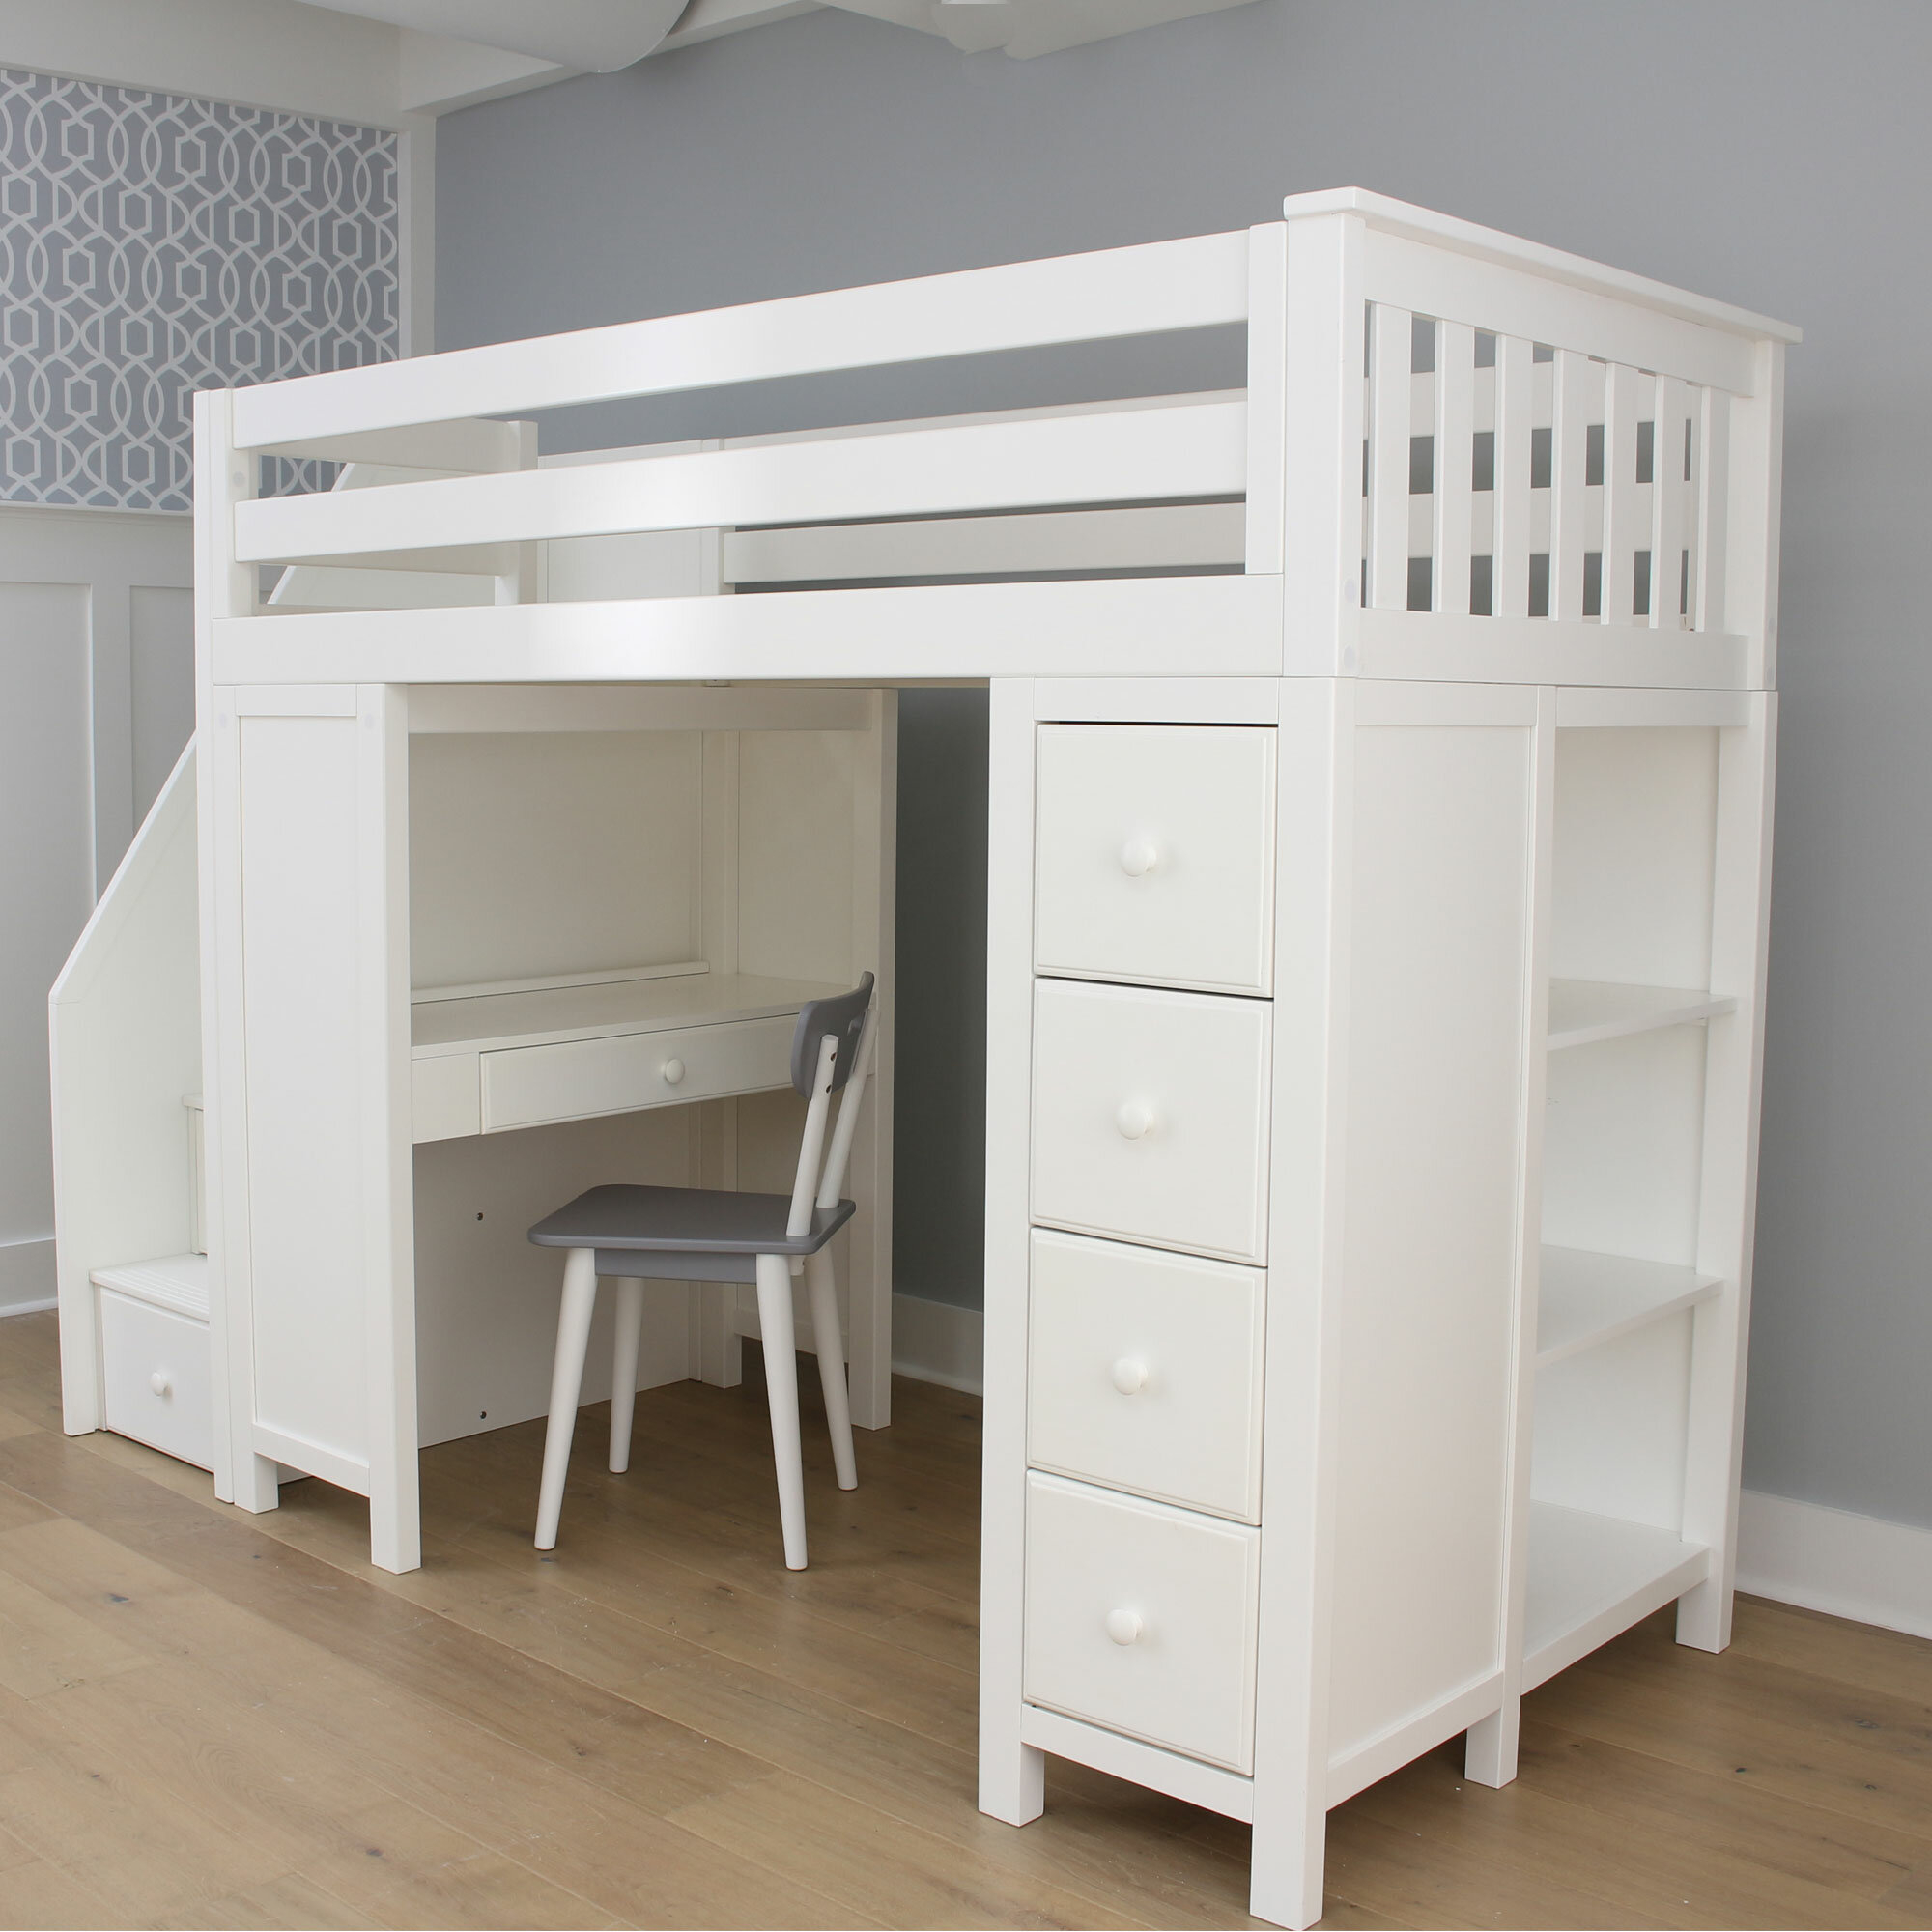 Bunk Beds With Dressers Visualhunt, Bunk With Desk And Dresser